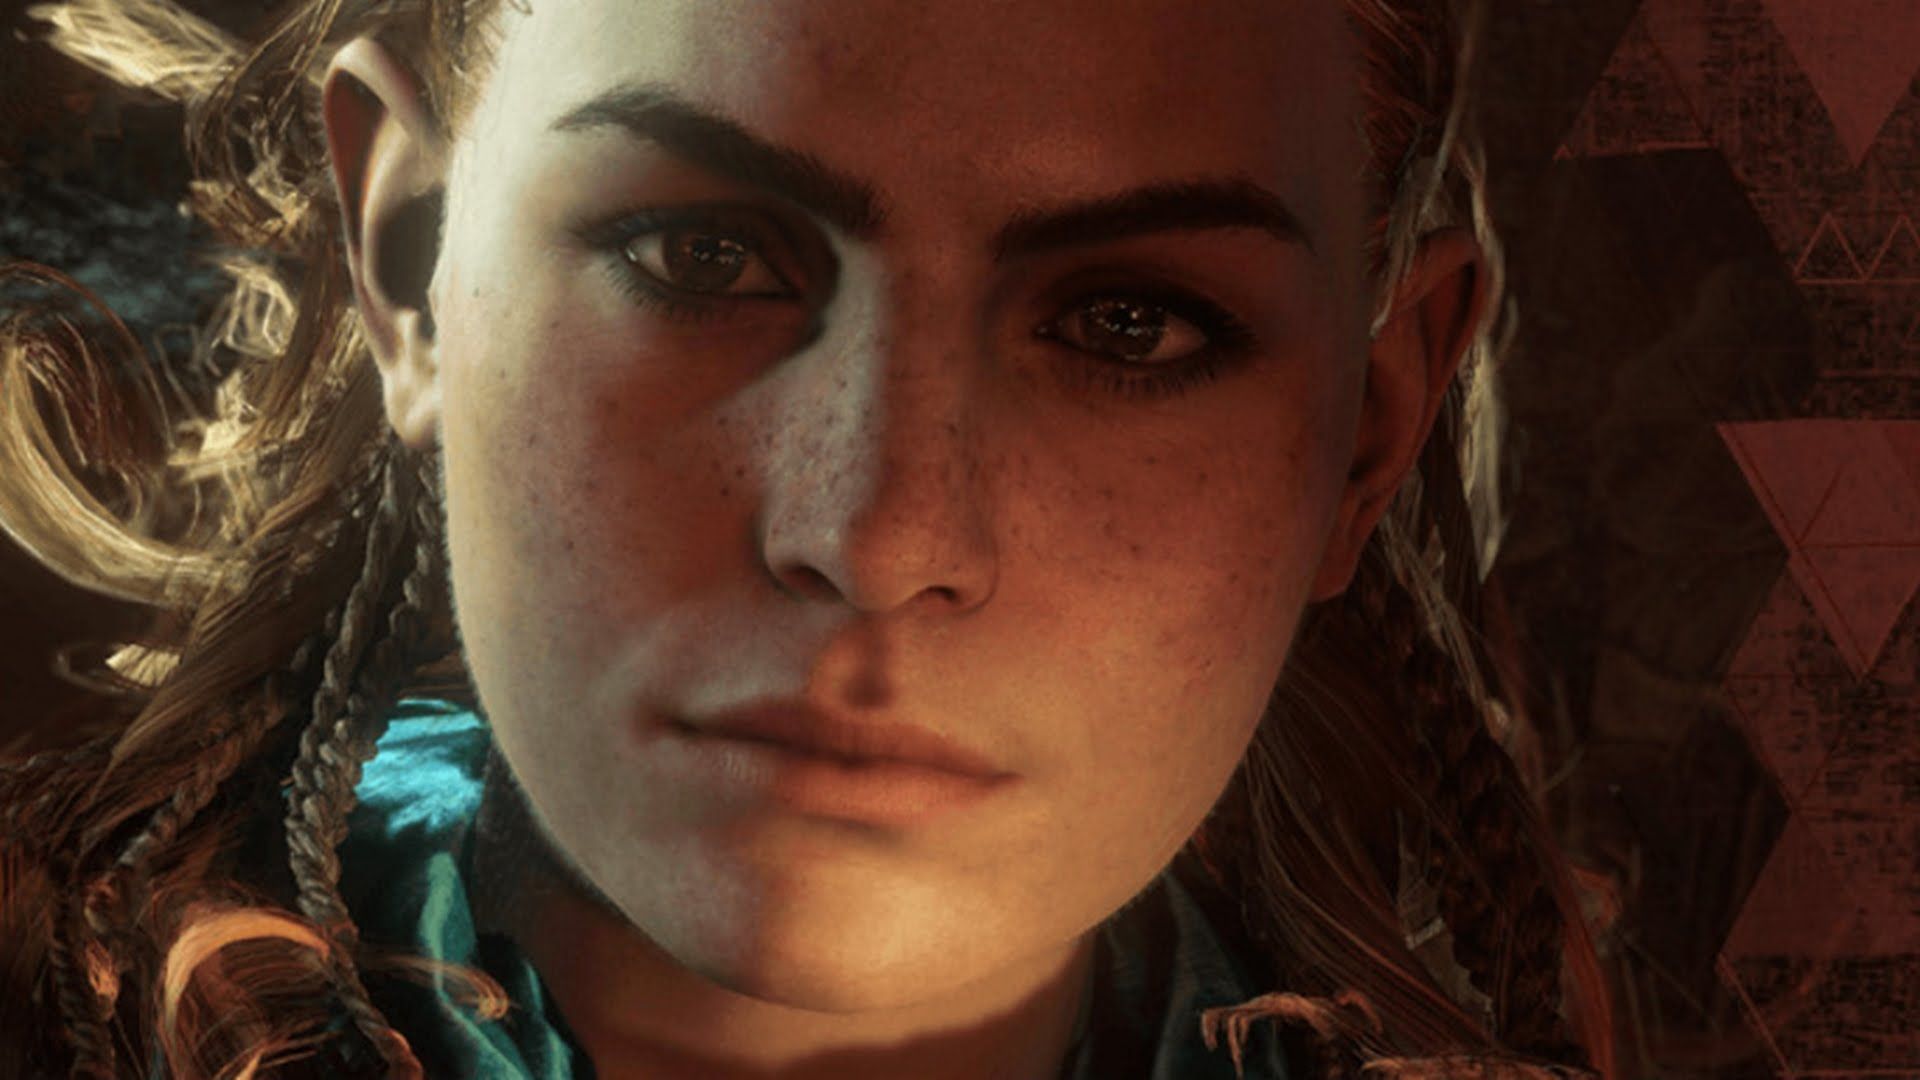 Guerrilla: Aloy Came Together Relatively Late in the Process; Voice Actress Was Massively Influential